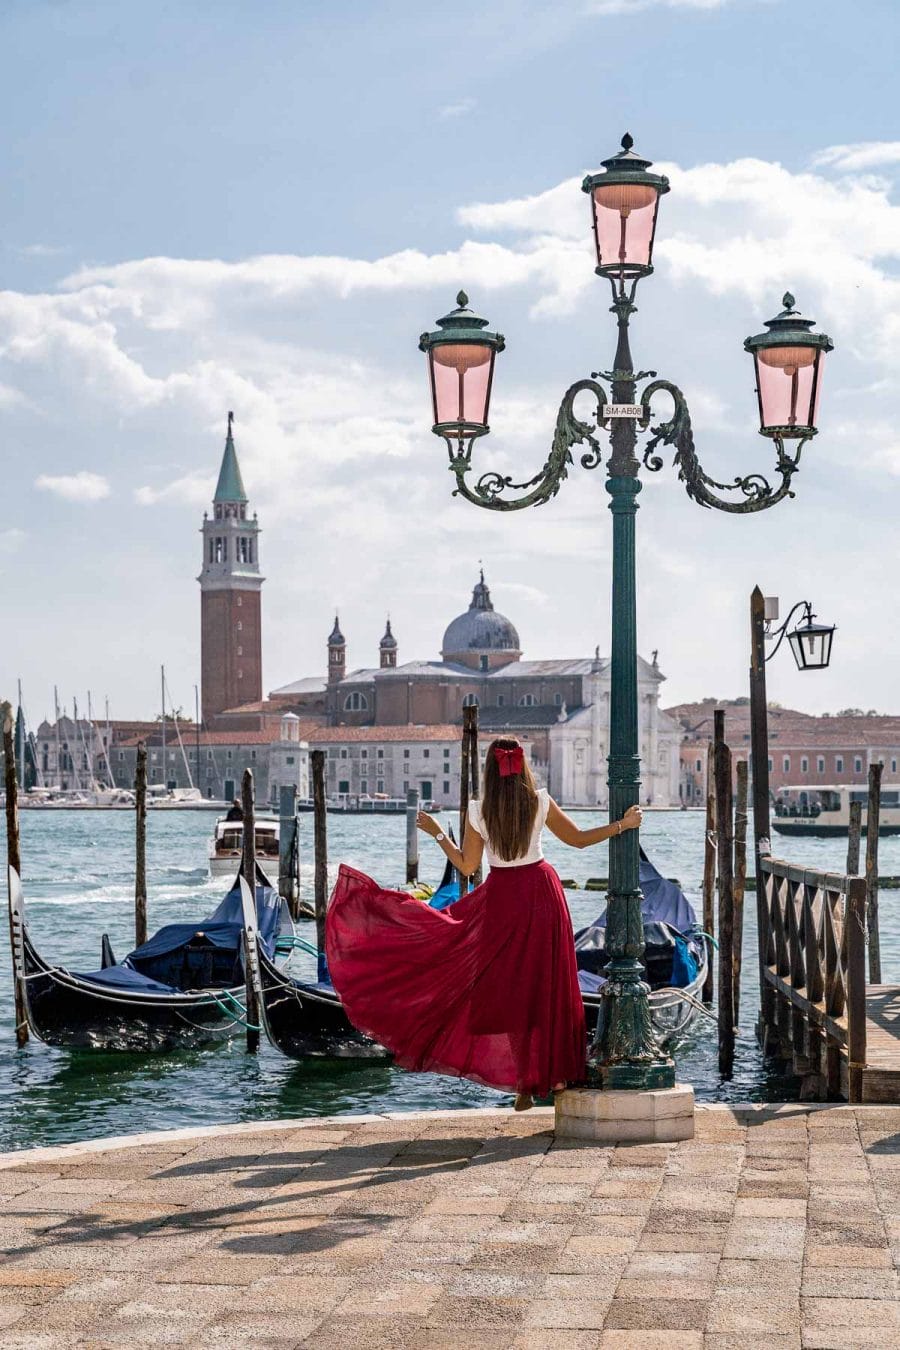 Girl in a red dress standing in front of the Gondolas at St. Mark's Square in Venice, Italy